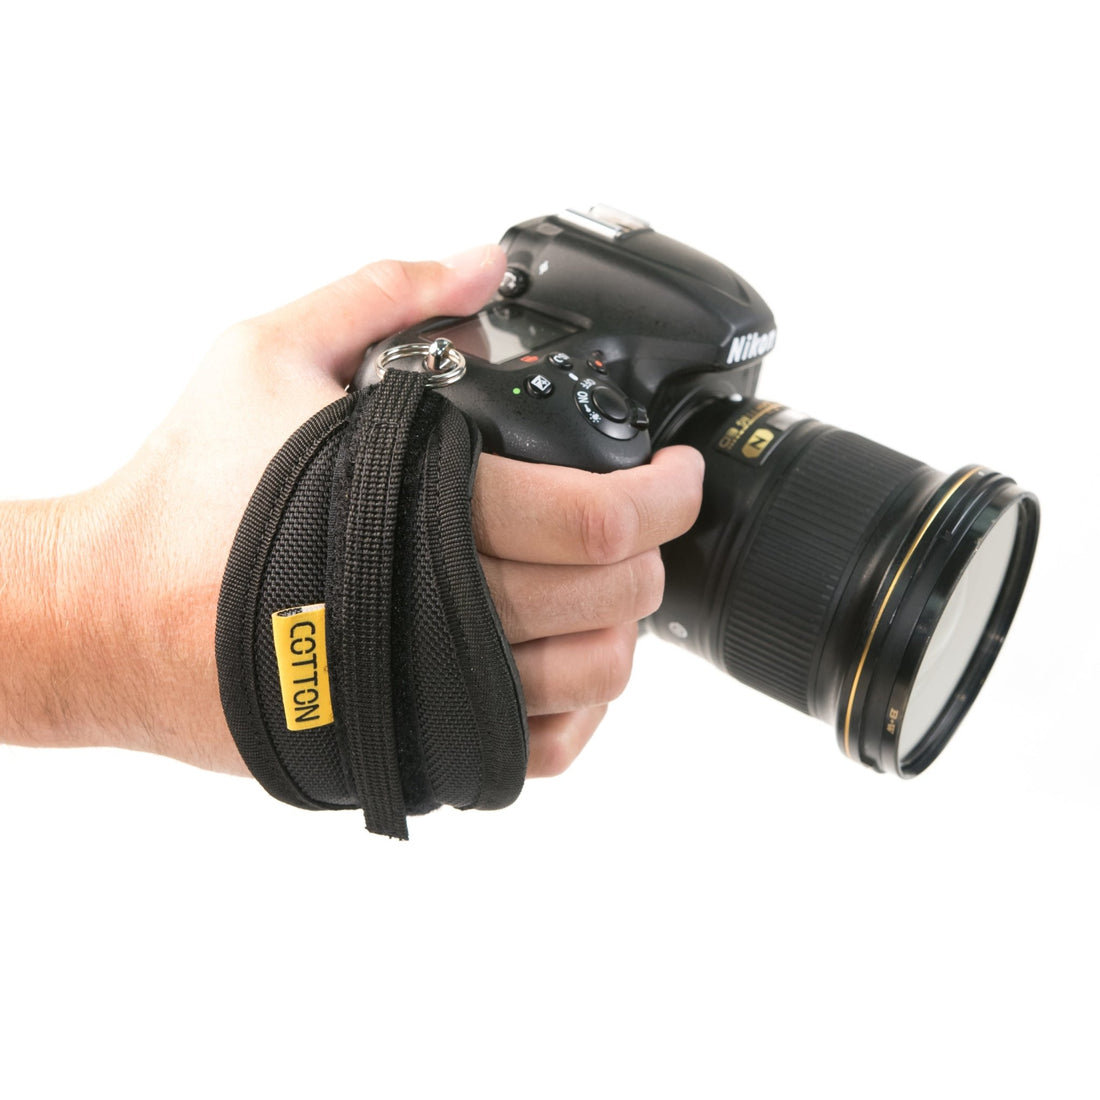 CCS Hand Strap Camera Carrying System - Cotton Camera Carrying Systems